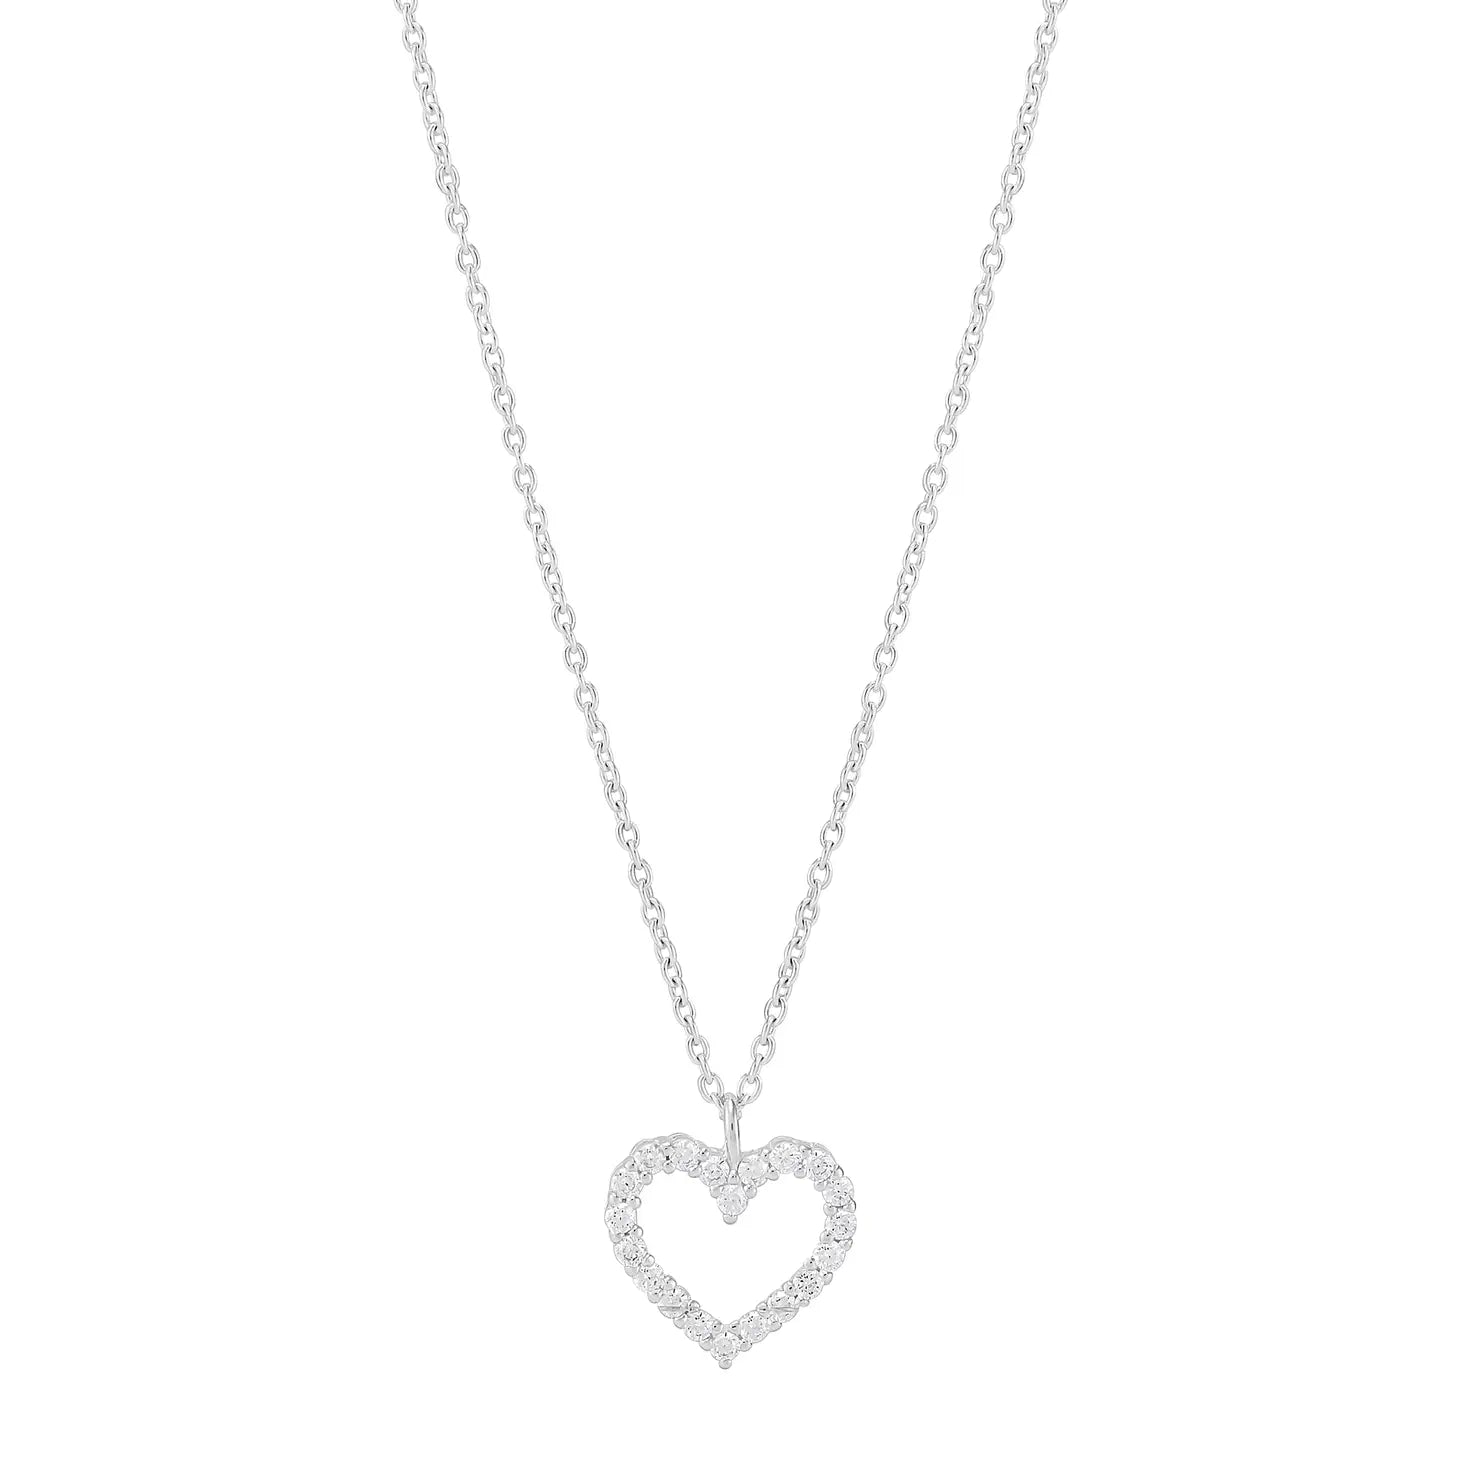 Growing Love Necklace